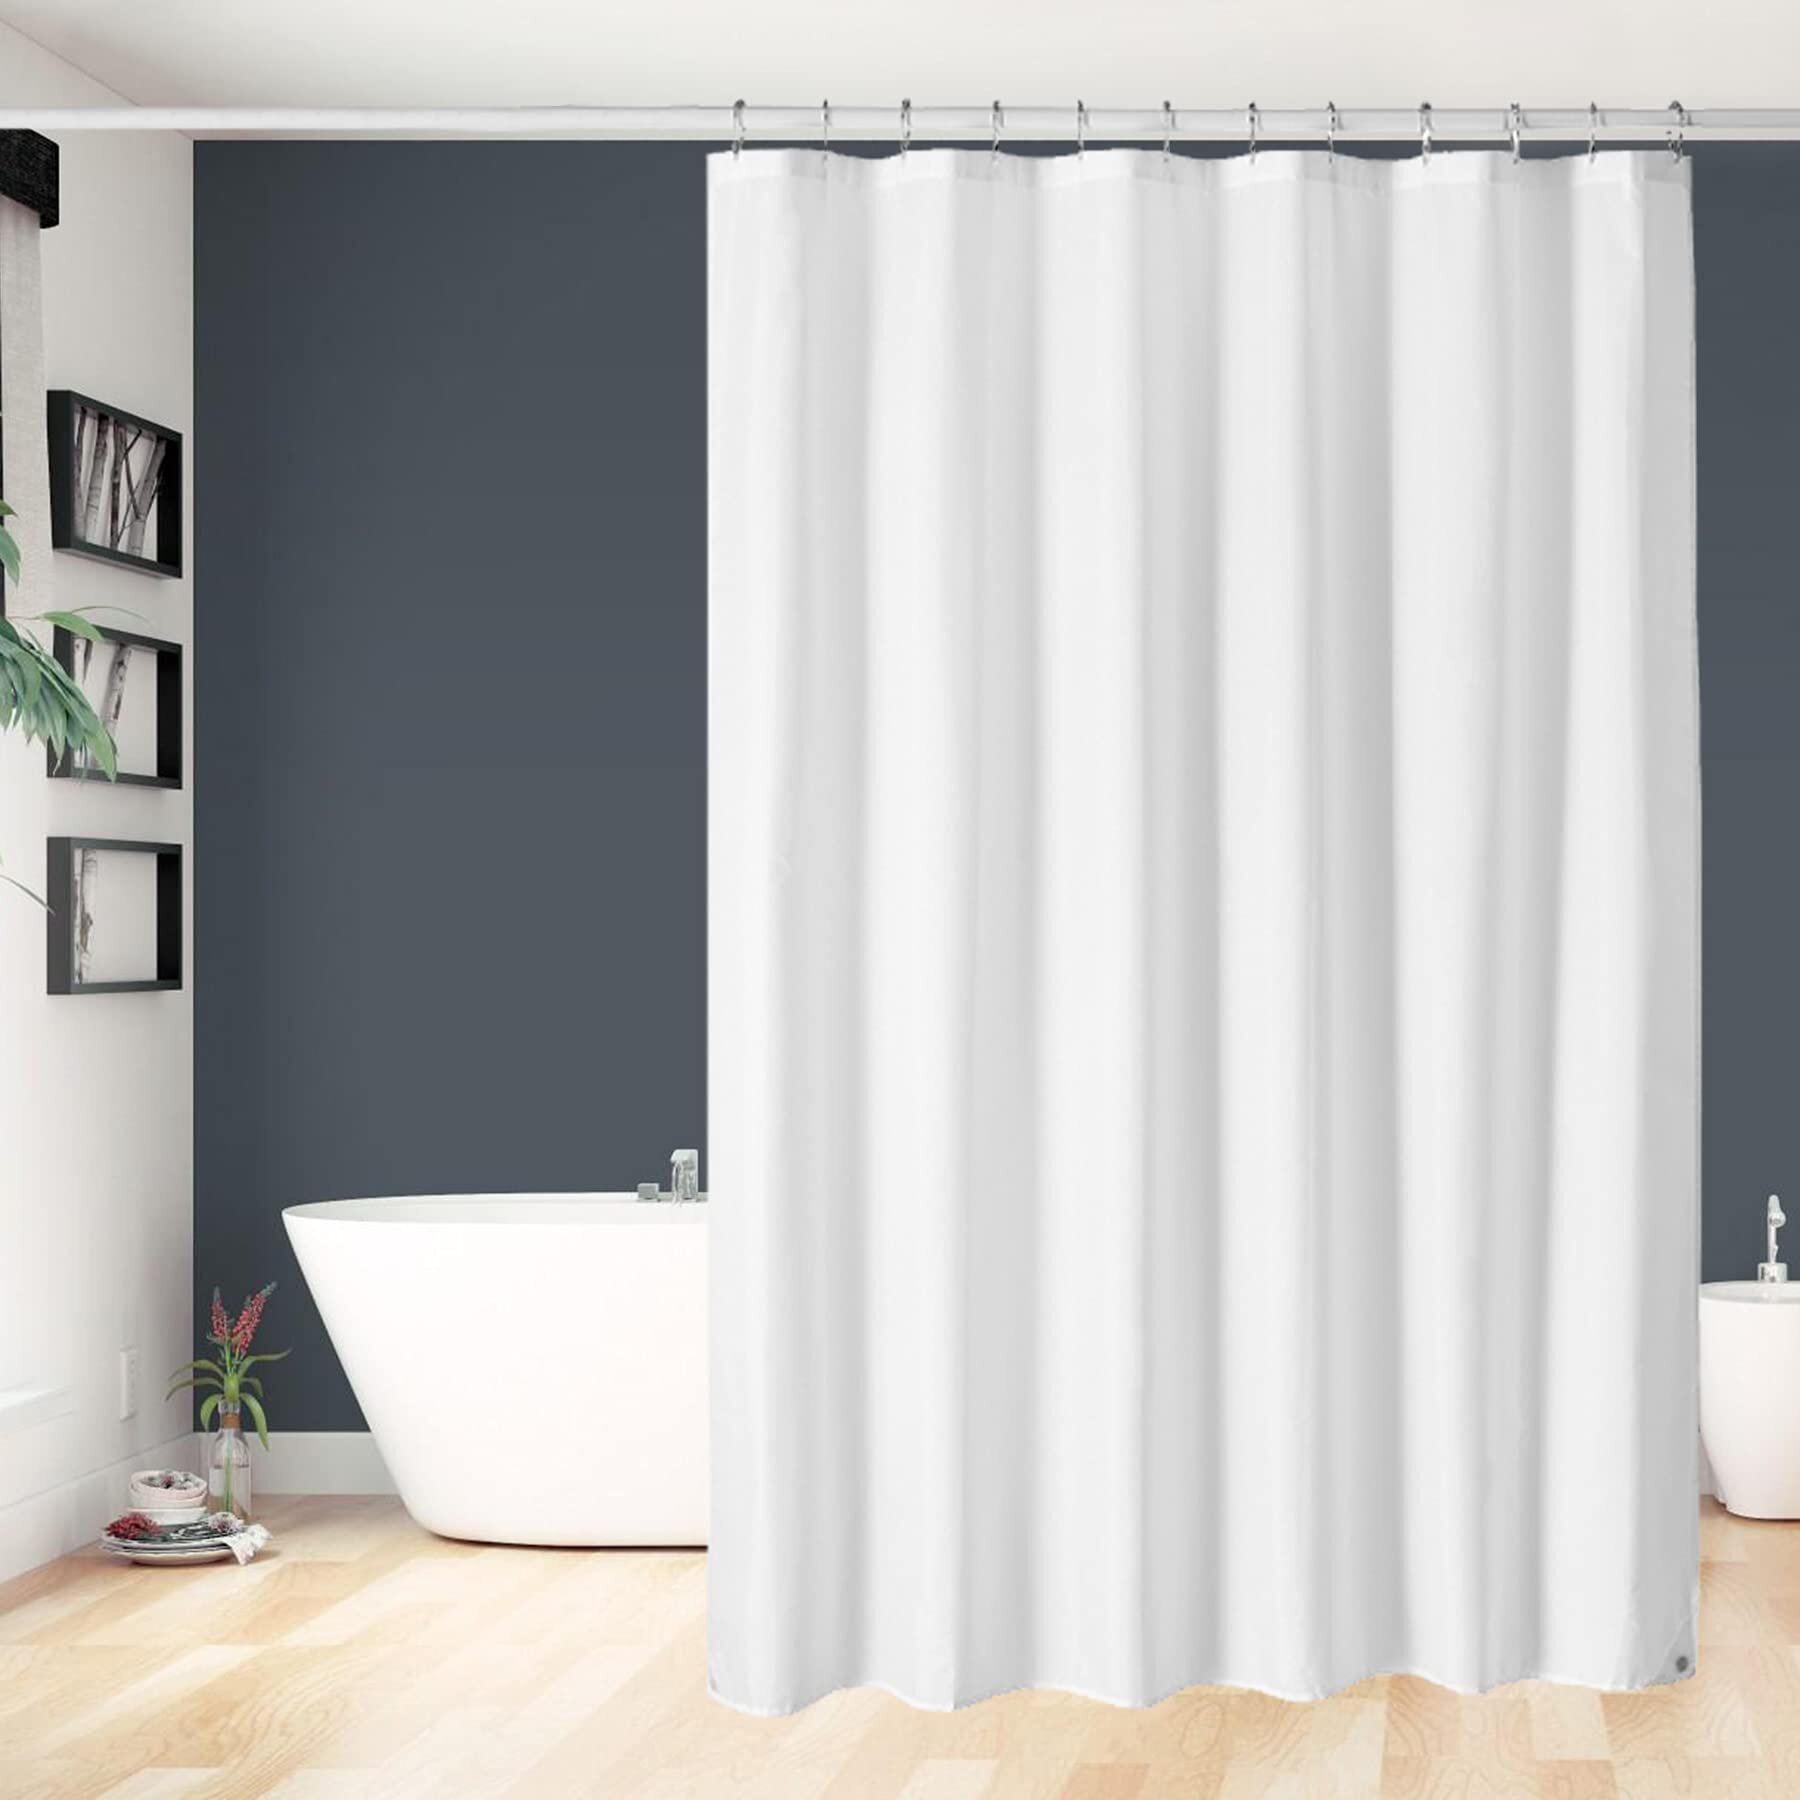 Details about   Radiation Waterproof Bathroom Polyester Shower Curtain Liner Water Resistant 